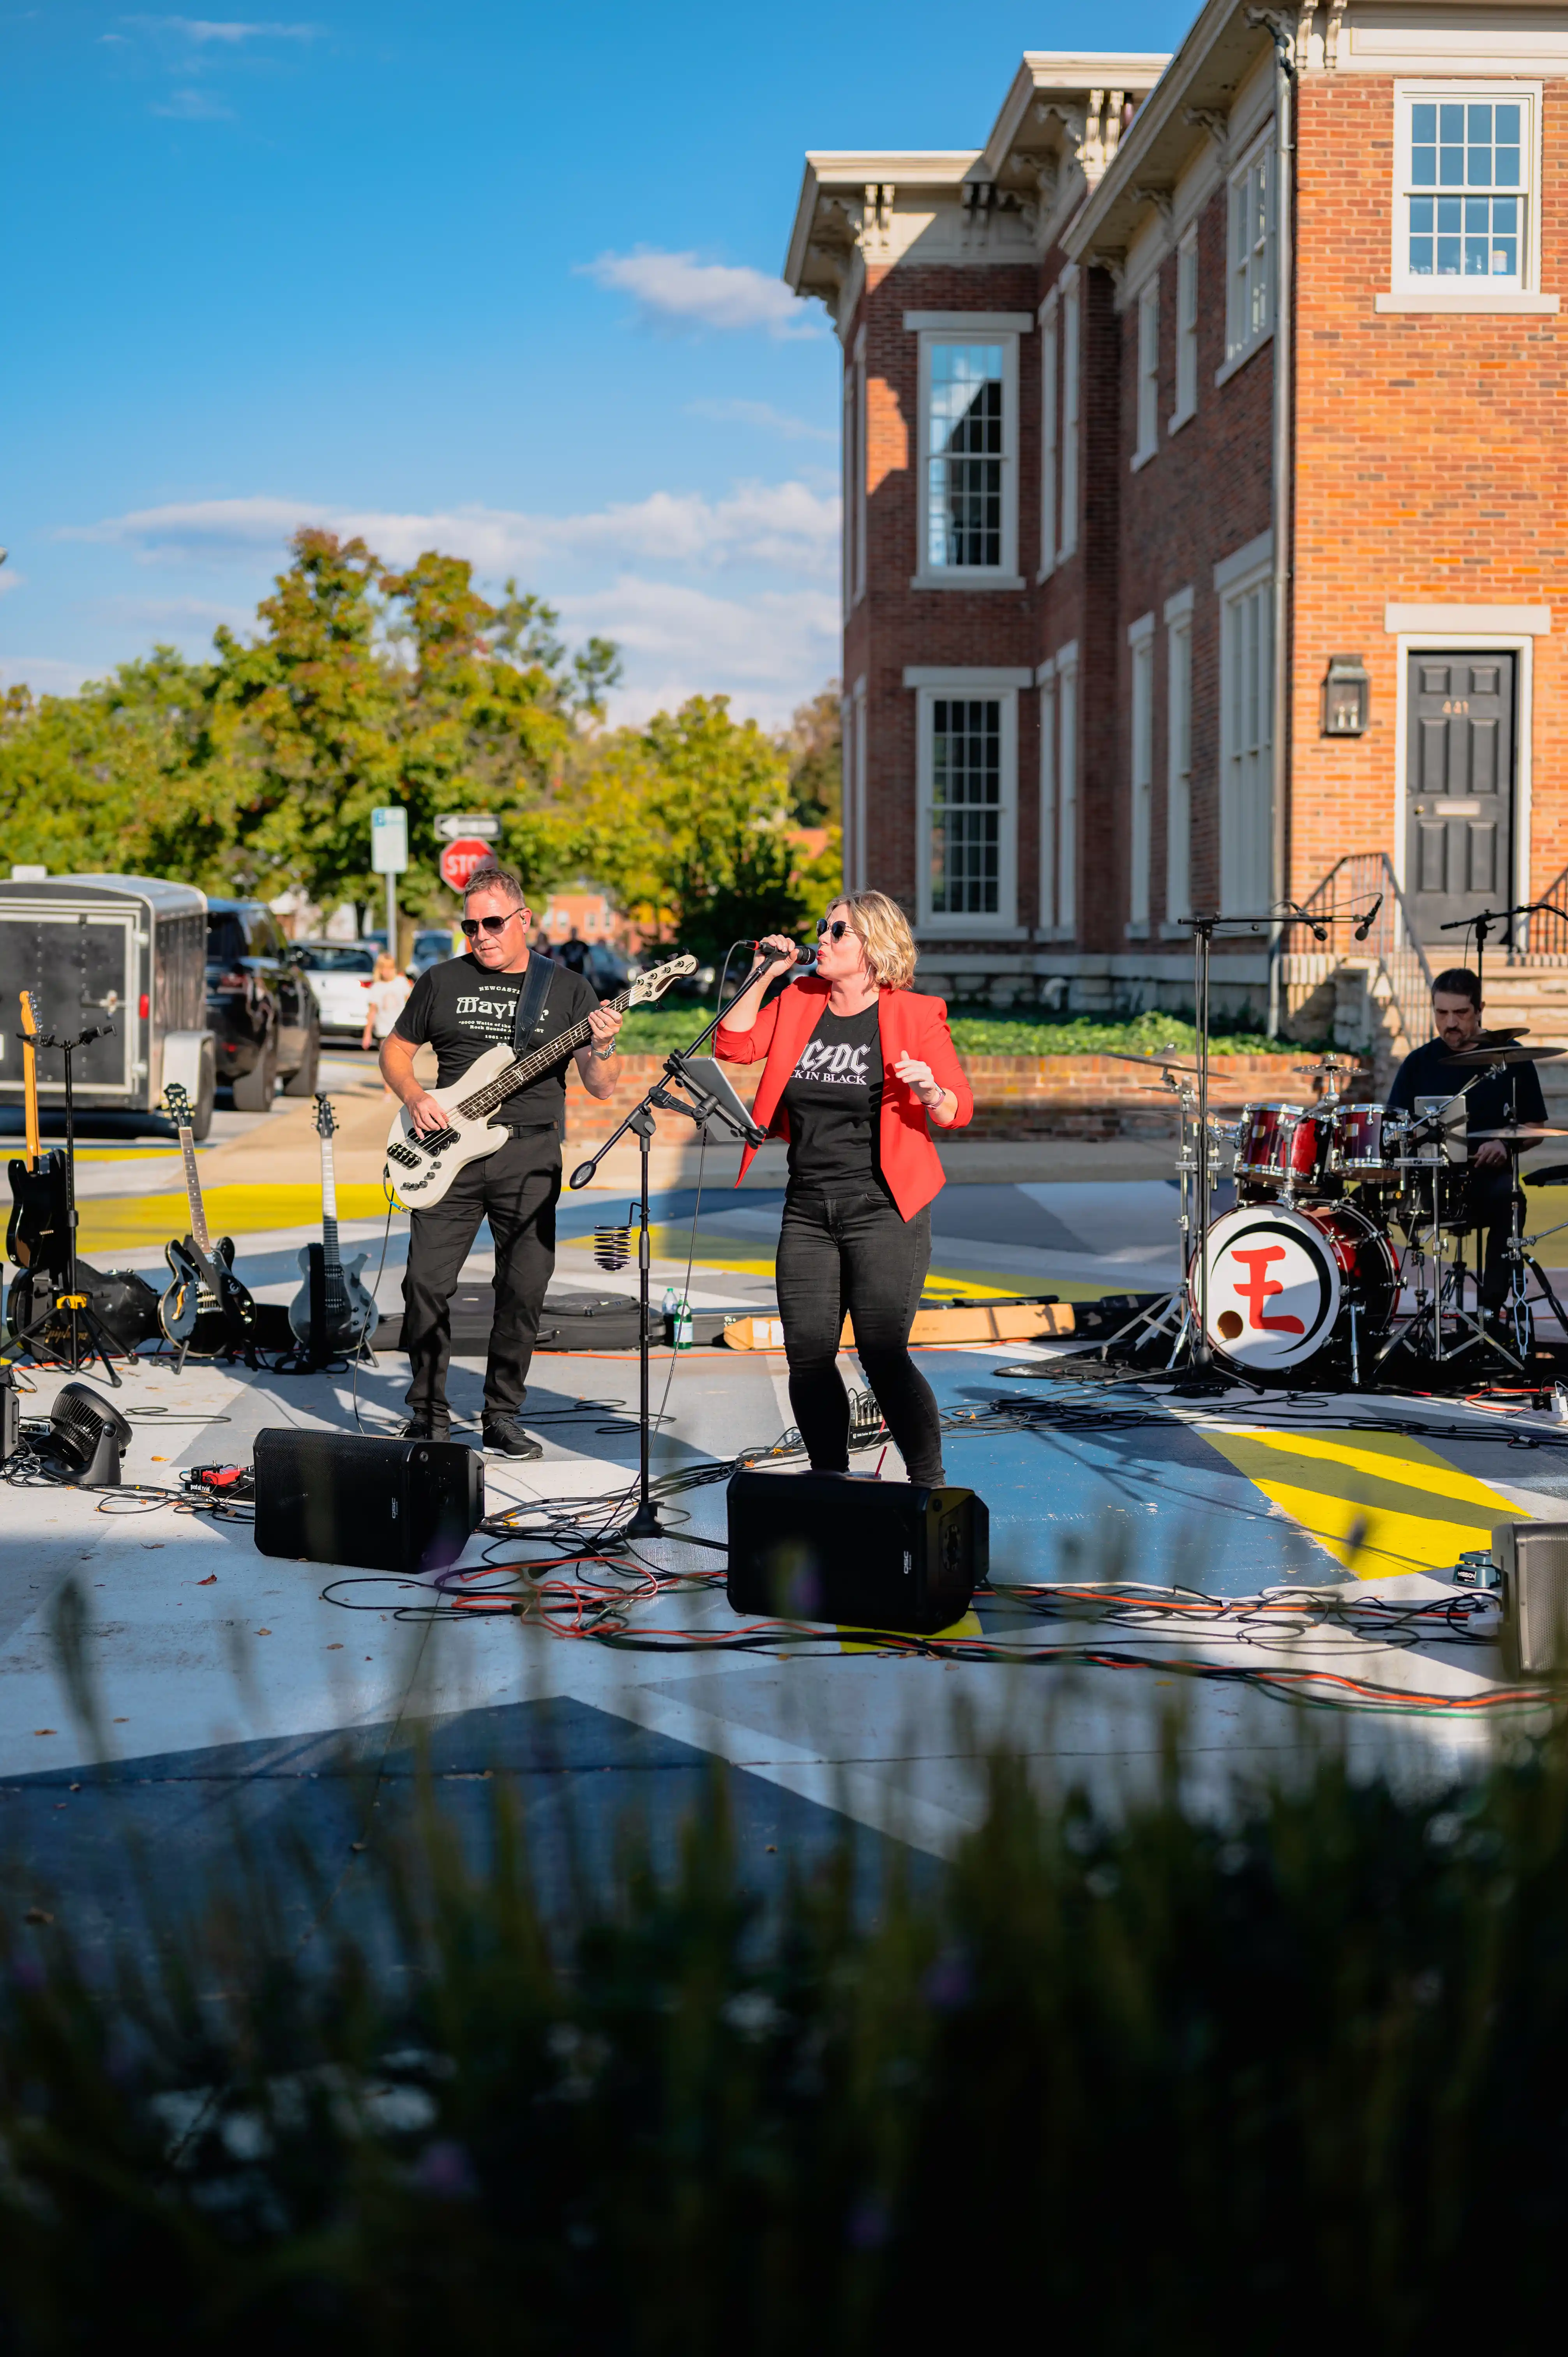 Band performing outdoors on a sunny day with a brick building and trees in the background.